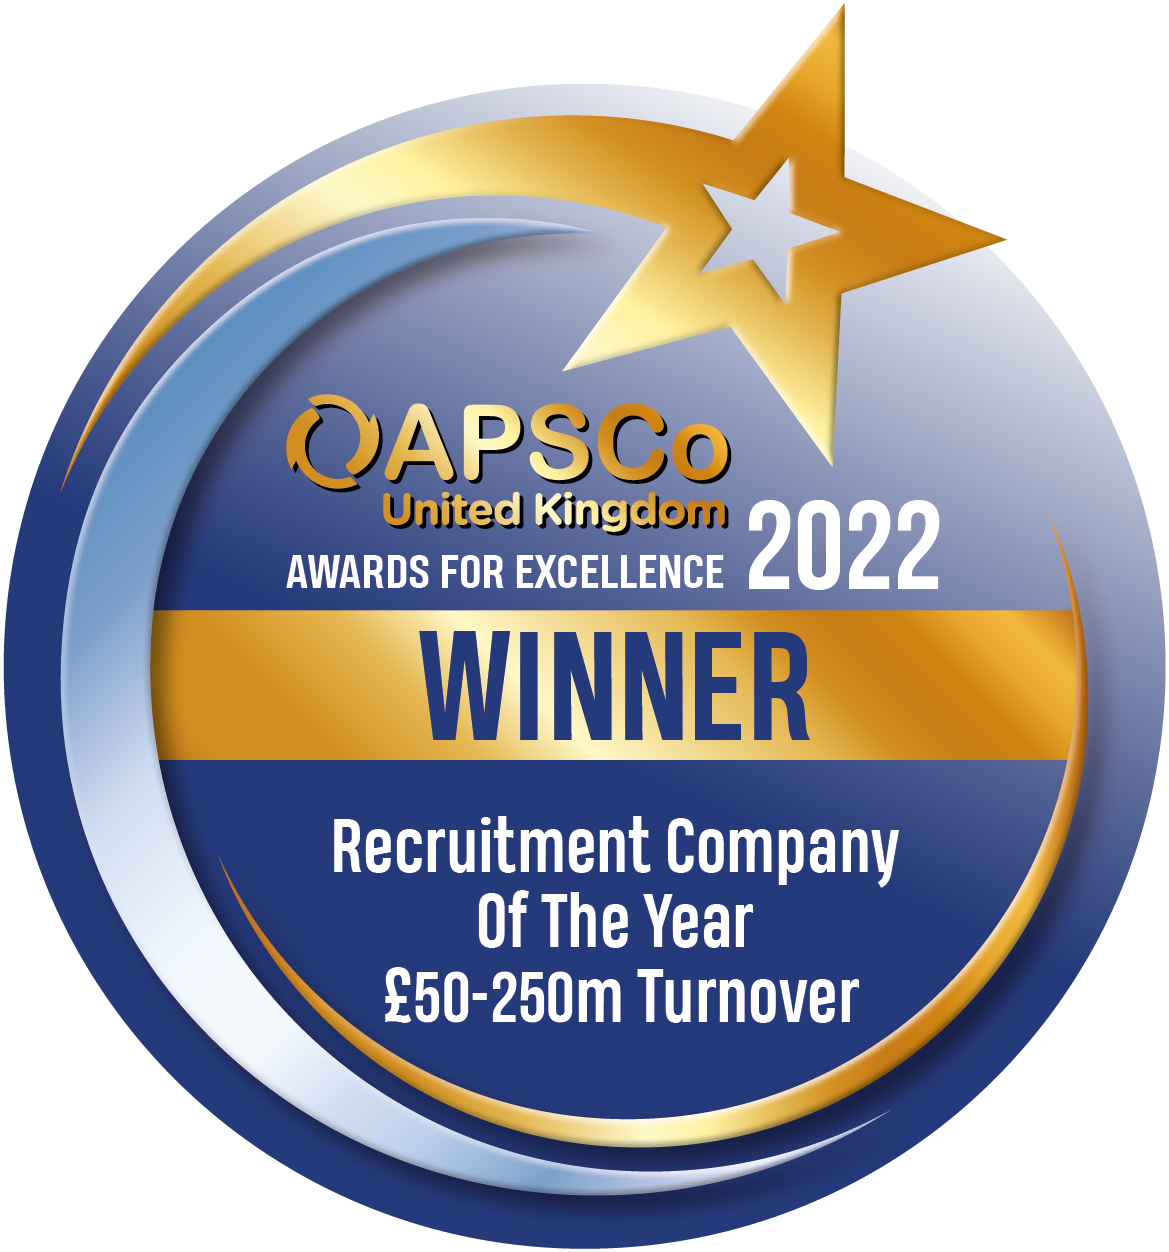 Recruitment Company of the Year